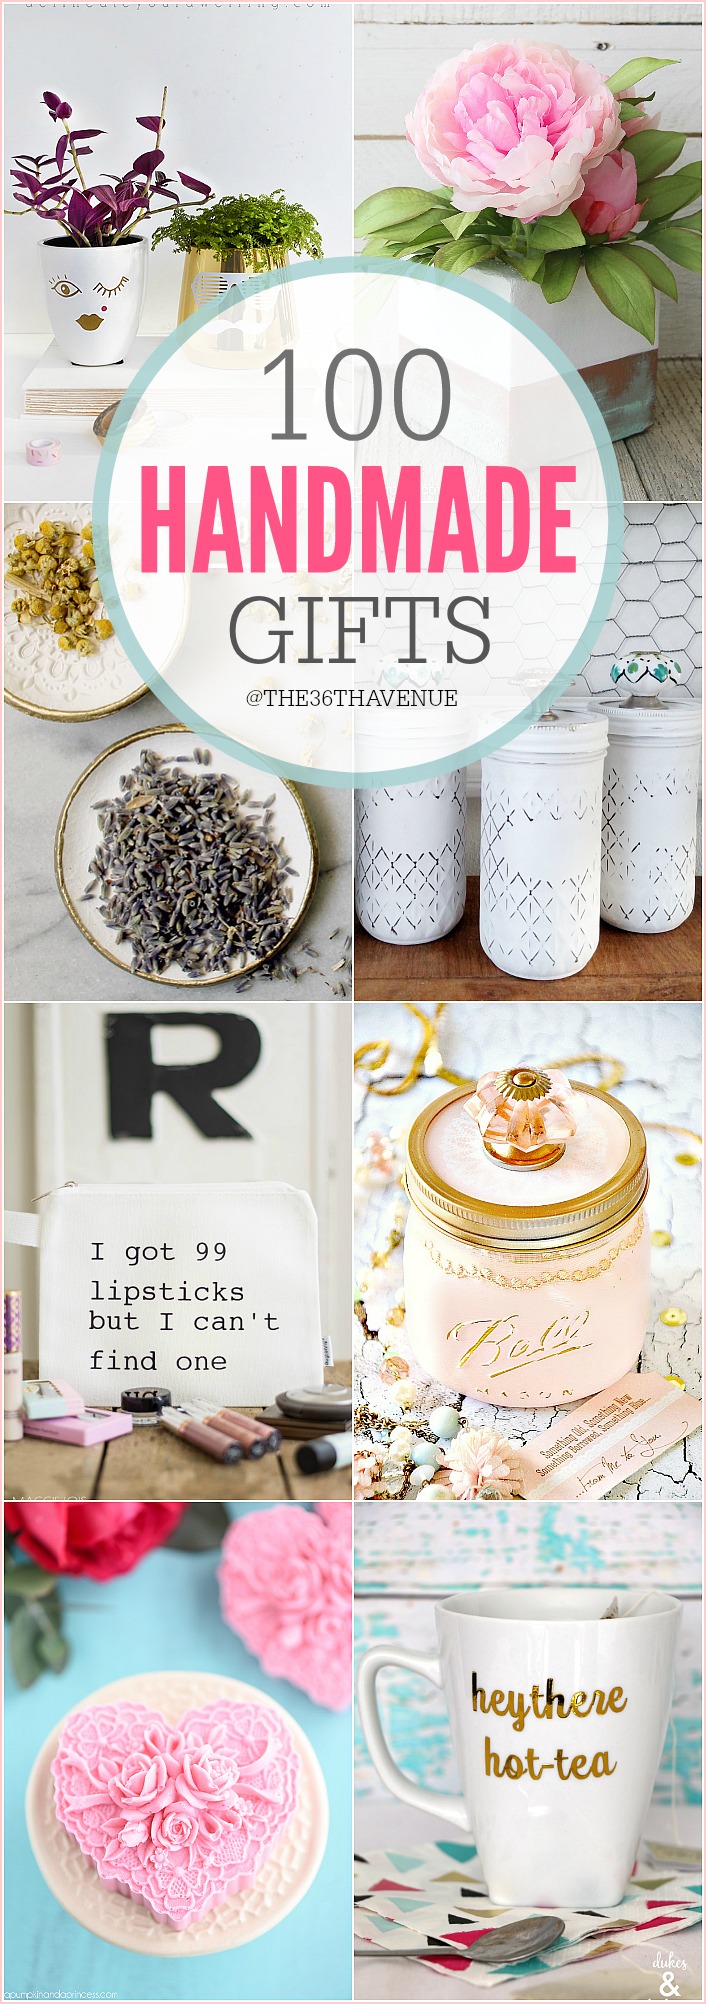 Homemade Gift Ideas for Everyone on Your List - A Beautiful Mess